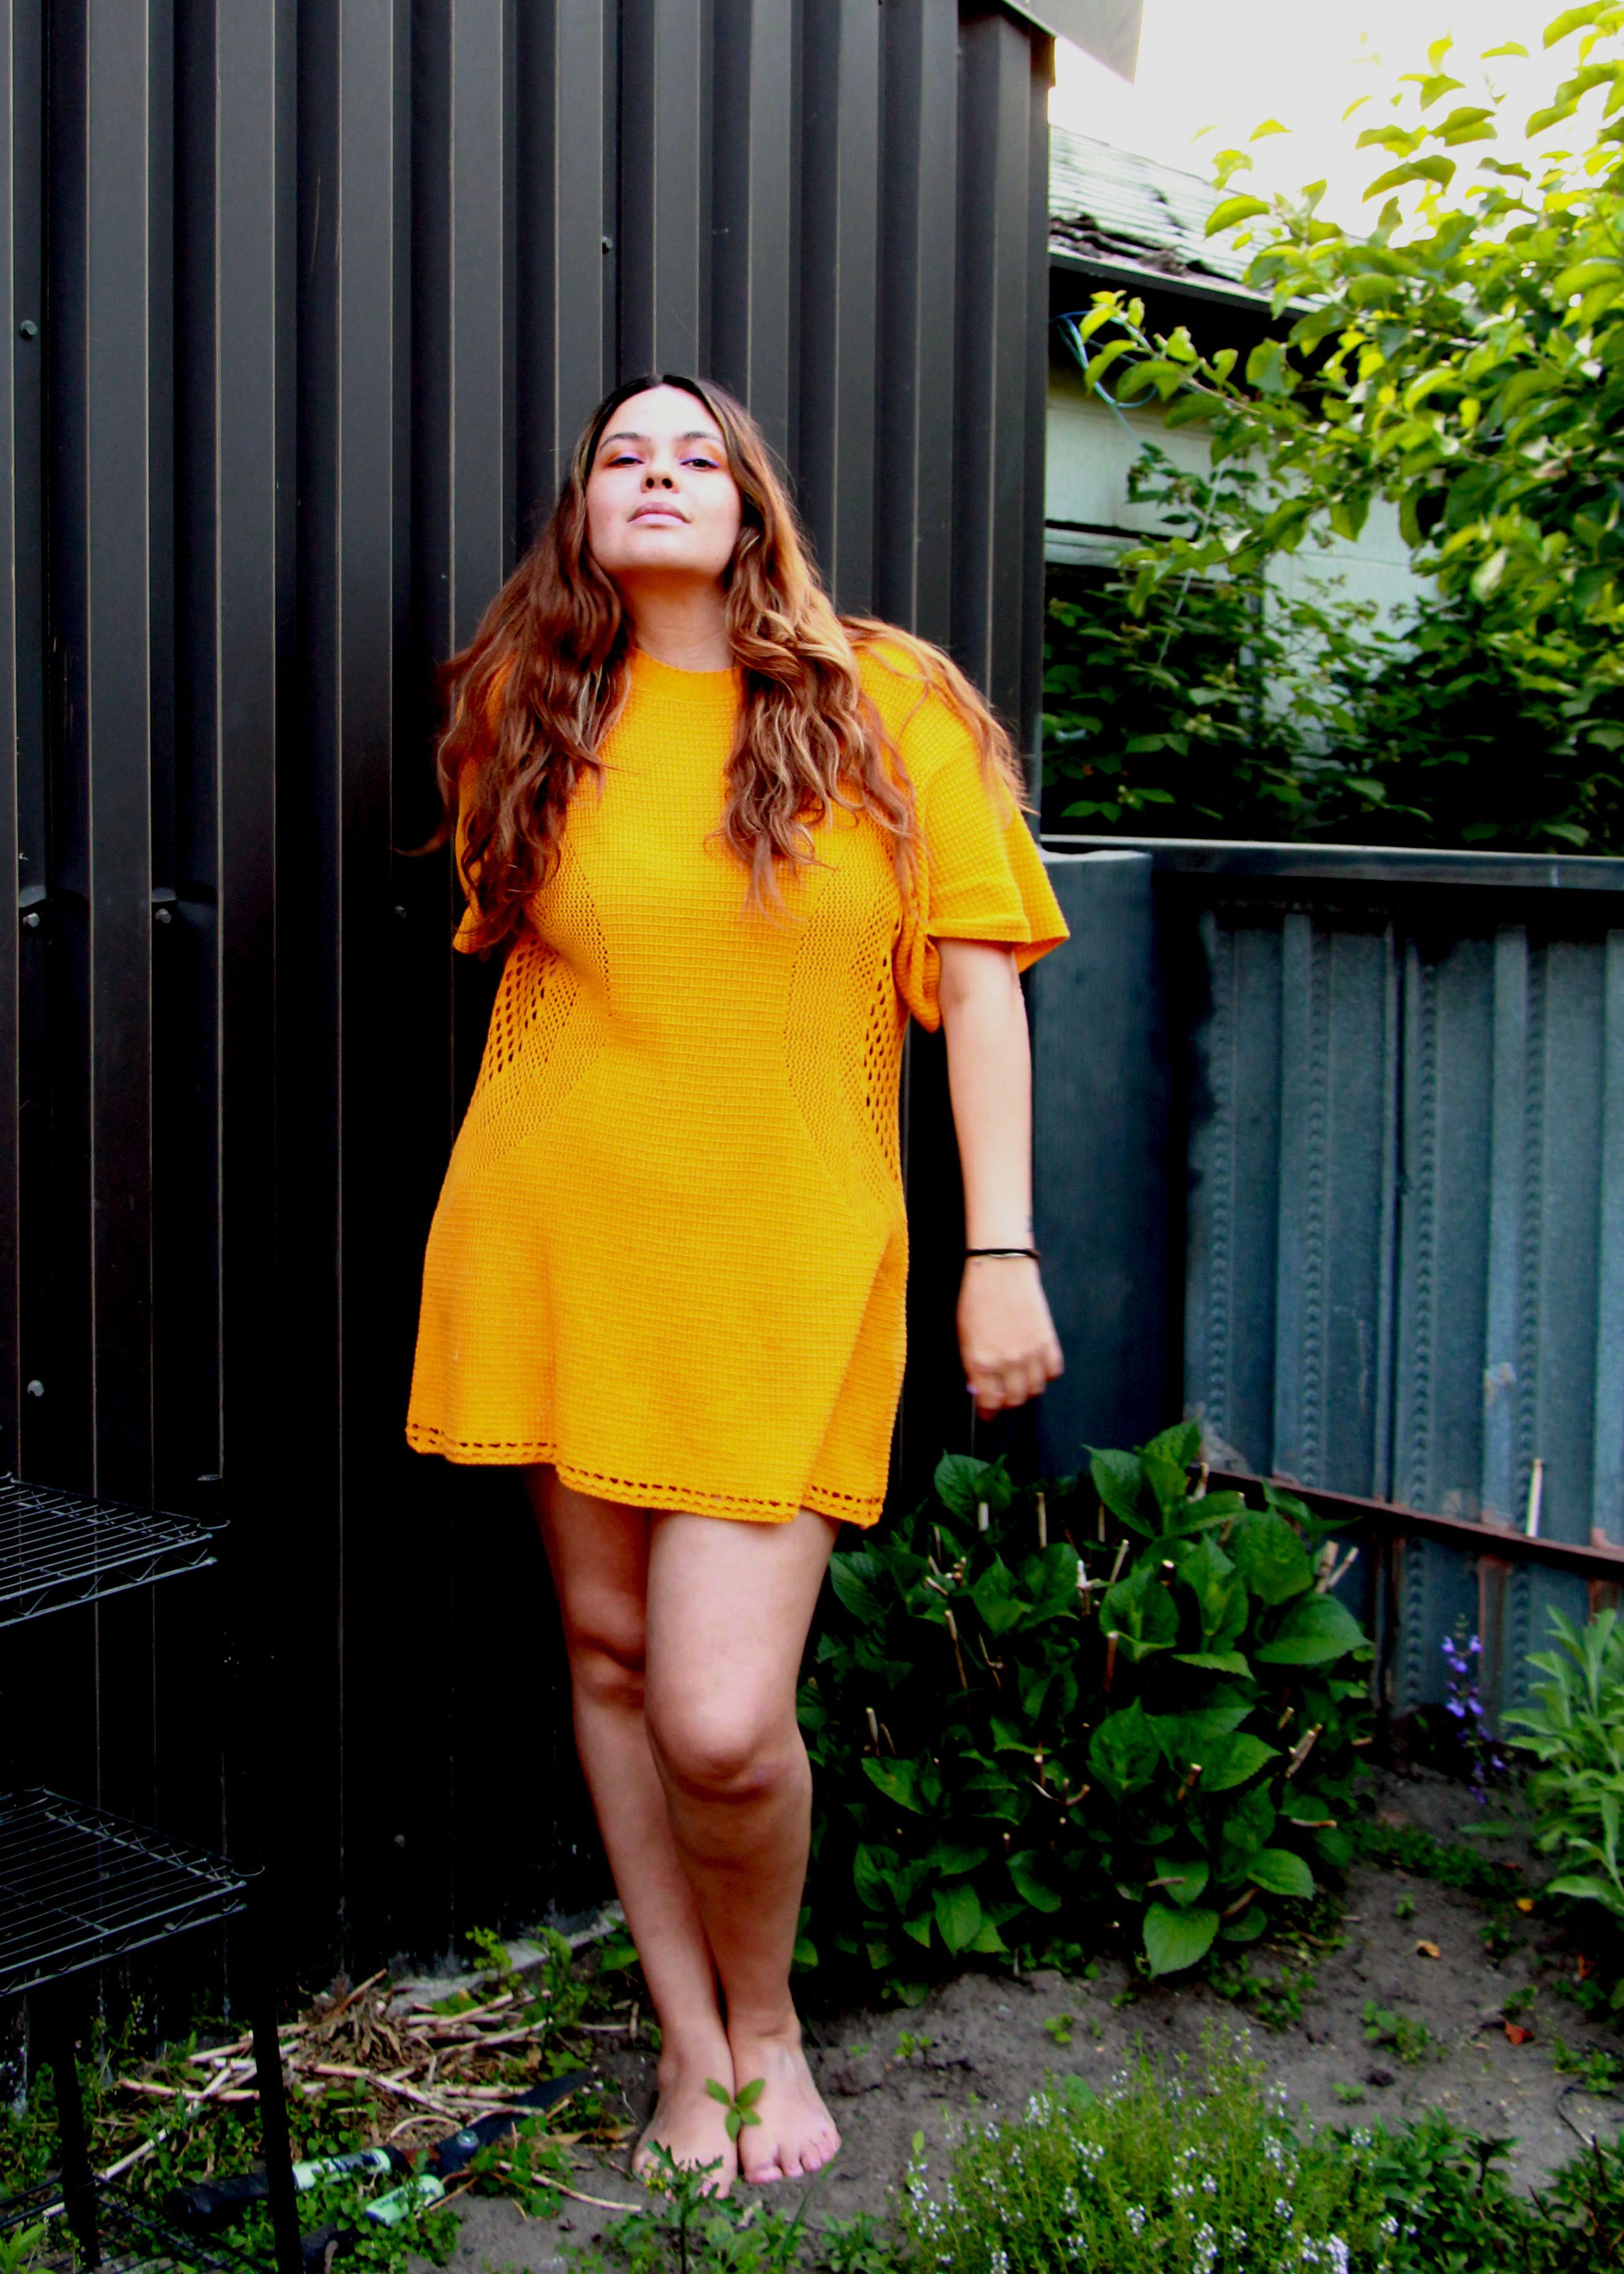  A woman with long brown hair is standing in a garden, in front of a metal shed and wood fence. She is smiling and wearing a marigold yellow dress. 